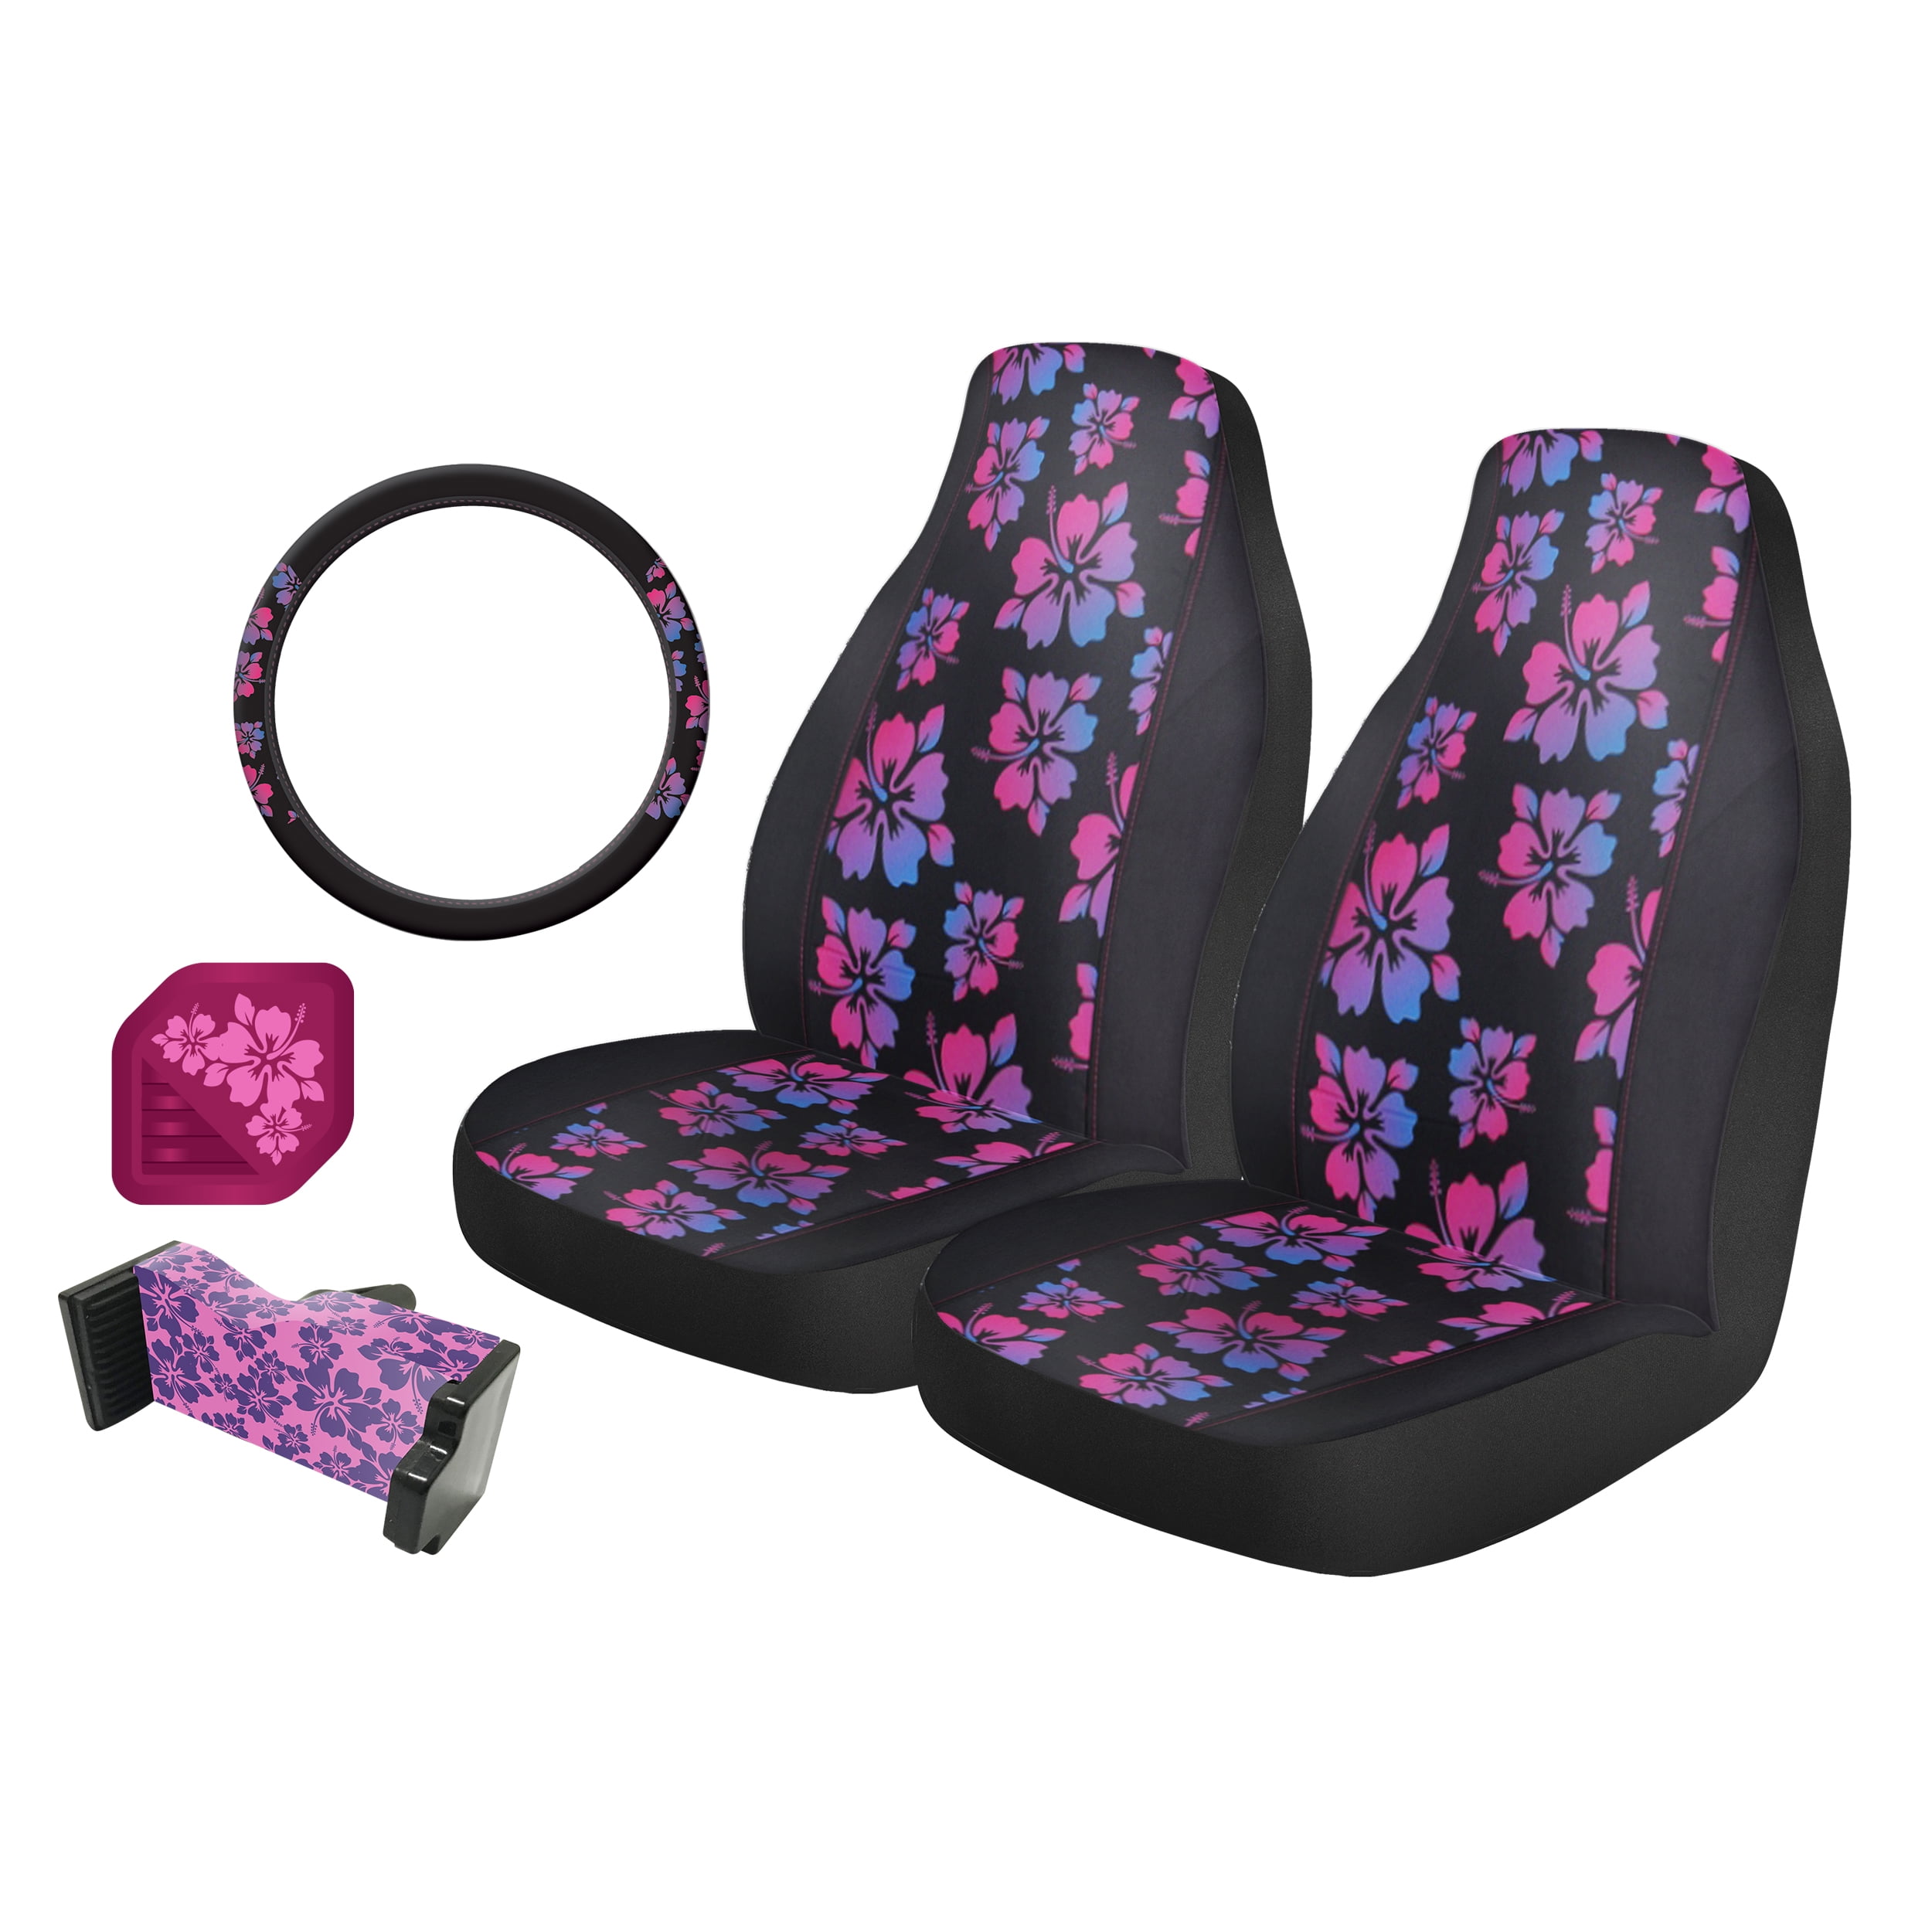 Full Set 8PCS TSVAGA Mandala Lotus Car Accessories Front Back Bench Bucket Seat Cover with Anti Slip Steering Wheel Cover+Car Seat Belt Covers+Armrest Center Console Cover for Auto Truck Van SUV